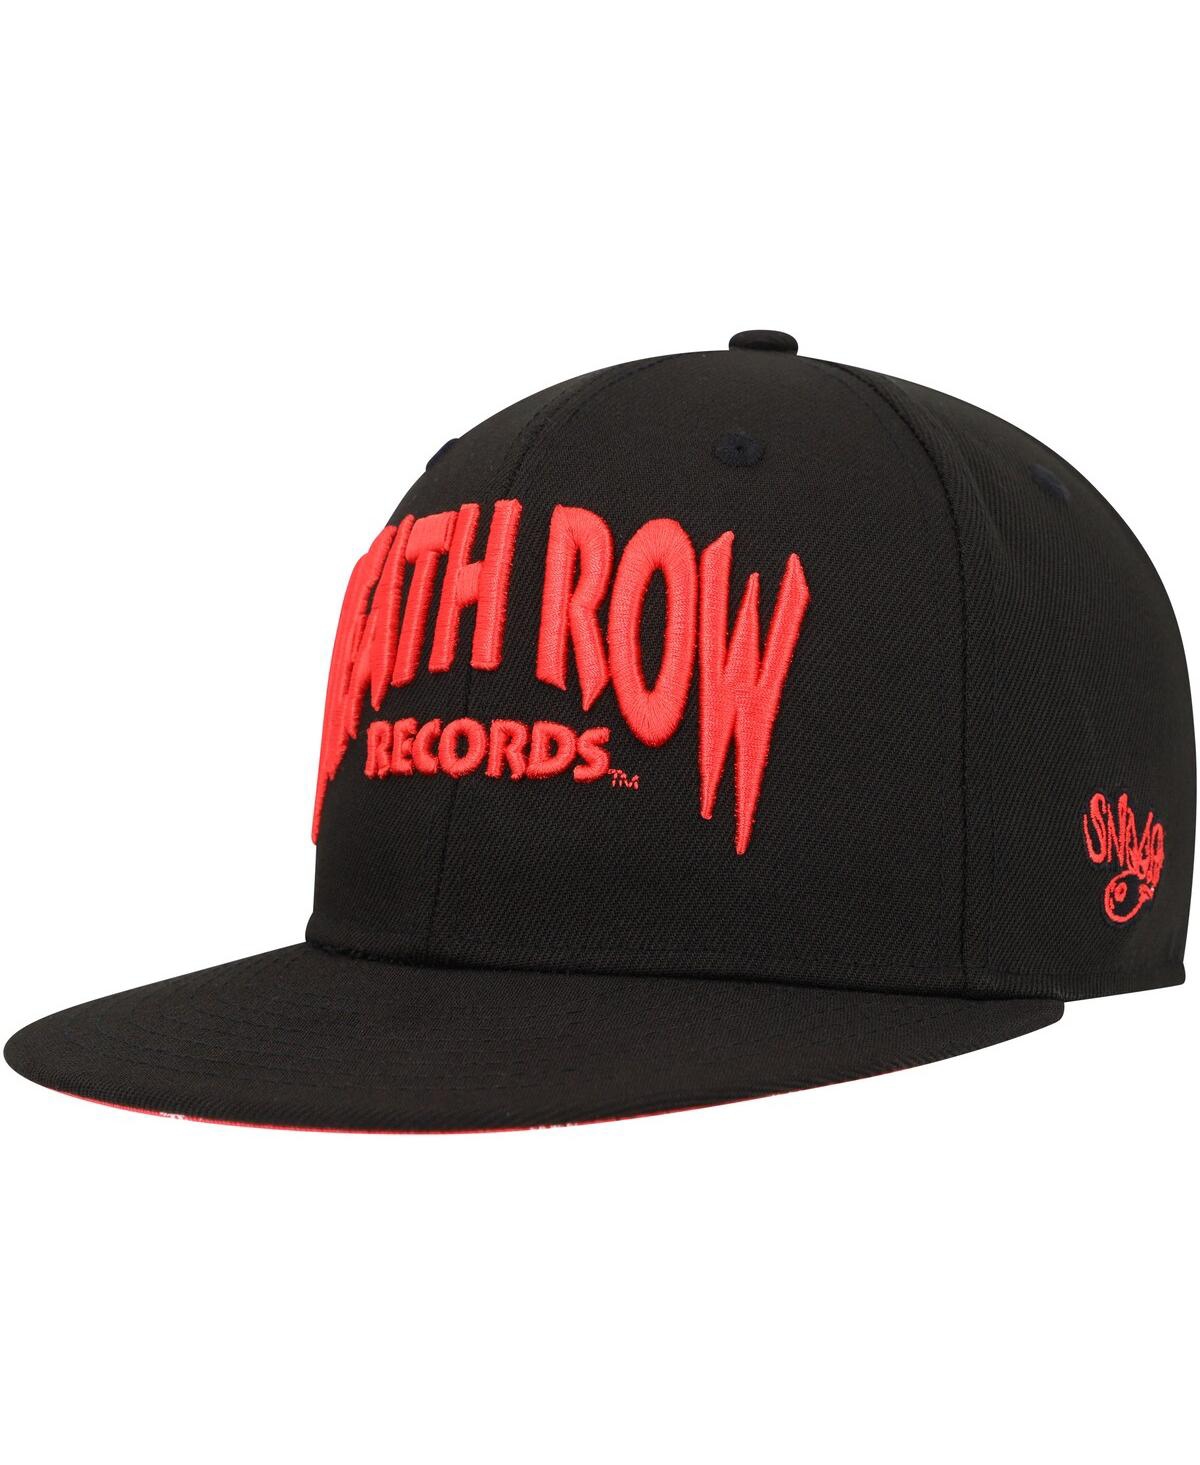 Men's Black Death Row Records Paisley Fitted Hat - Black